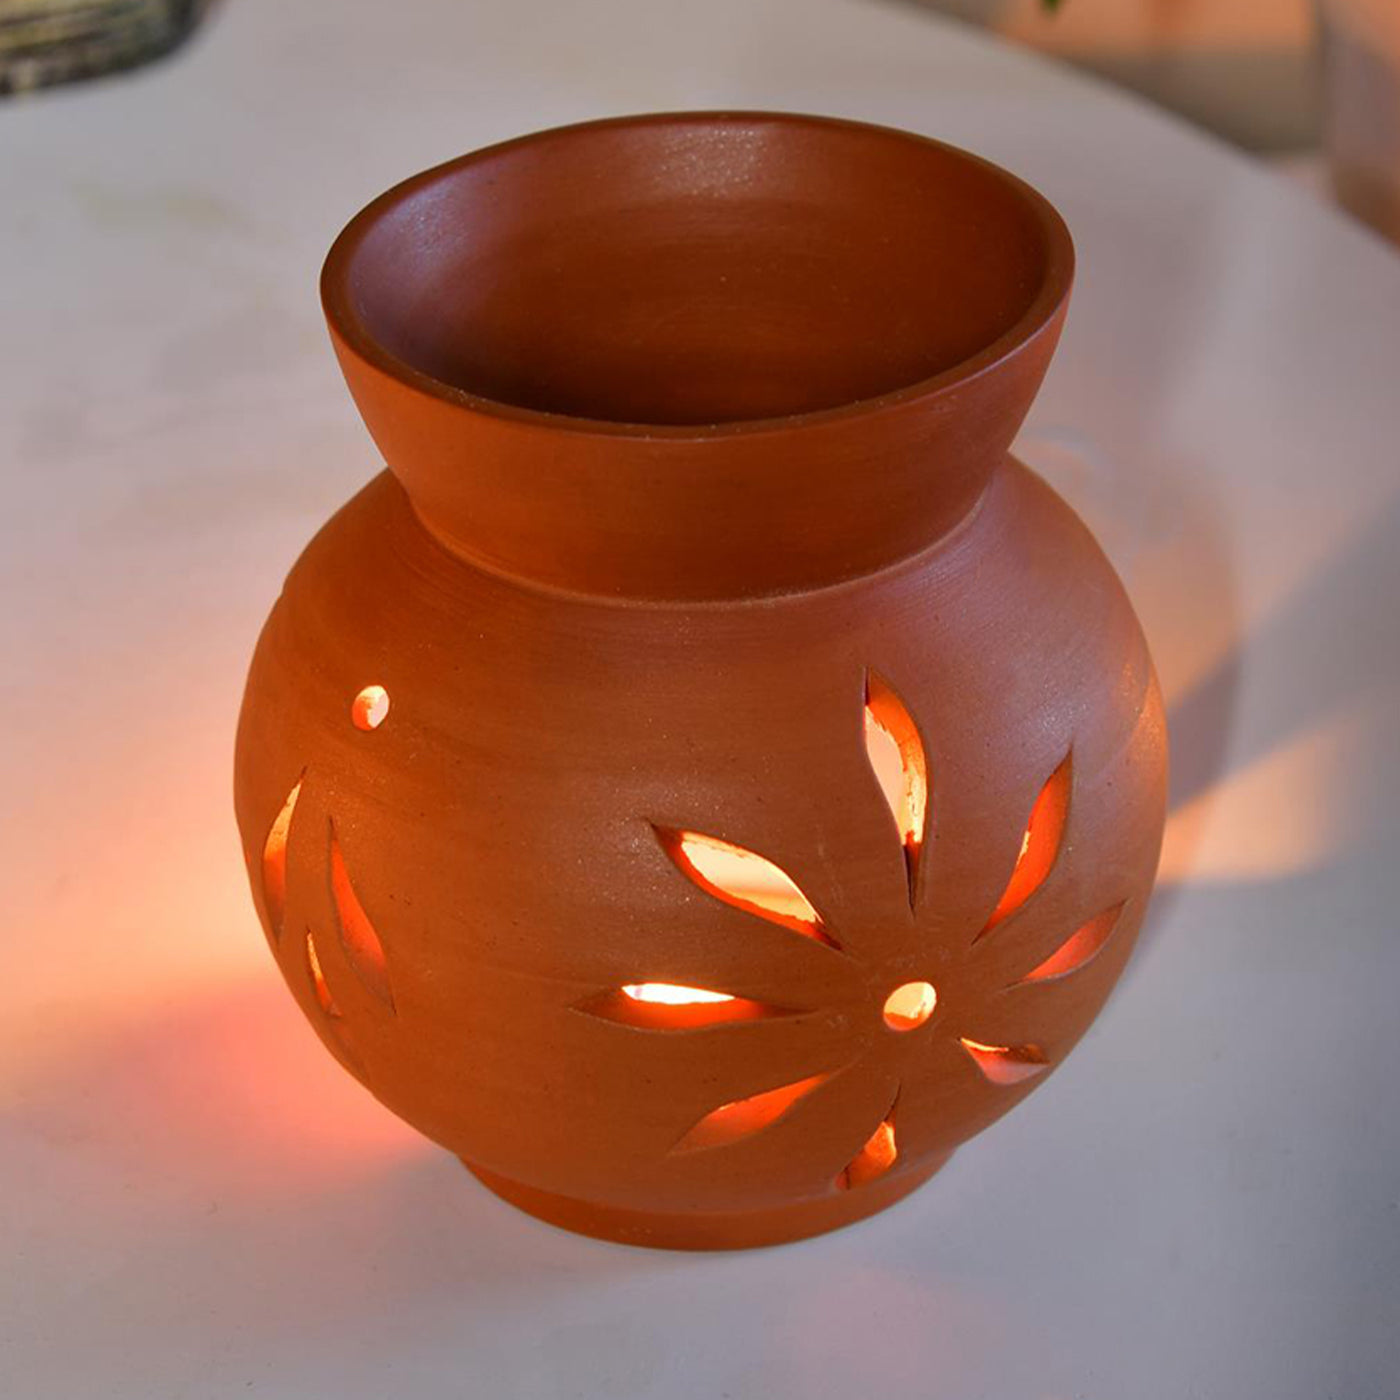 Terracotta Diffuser Artisan-Made Round Bottom Tabletop Home Decor Accent